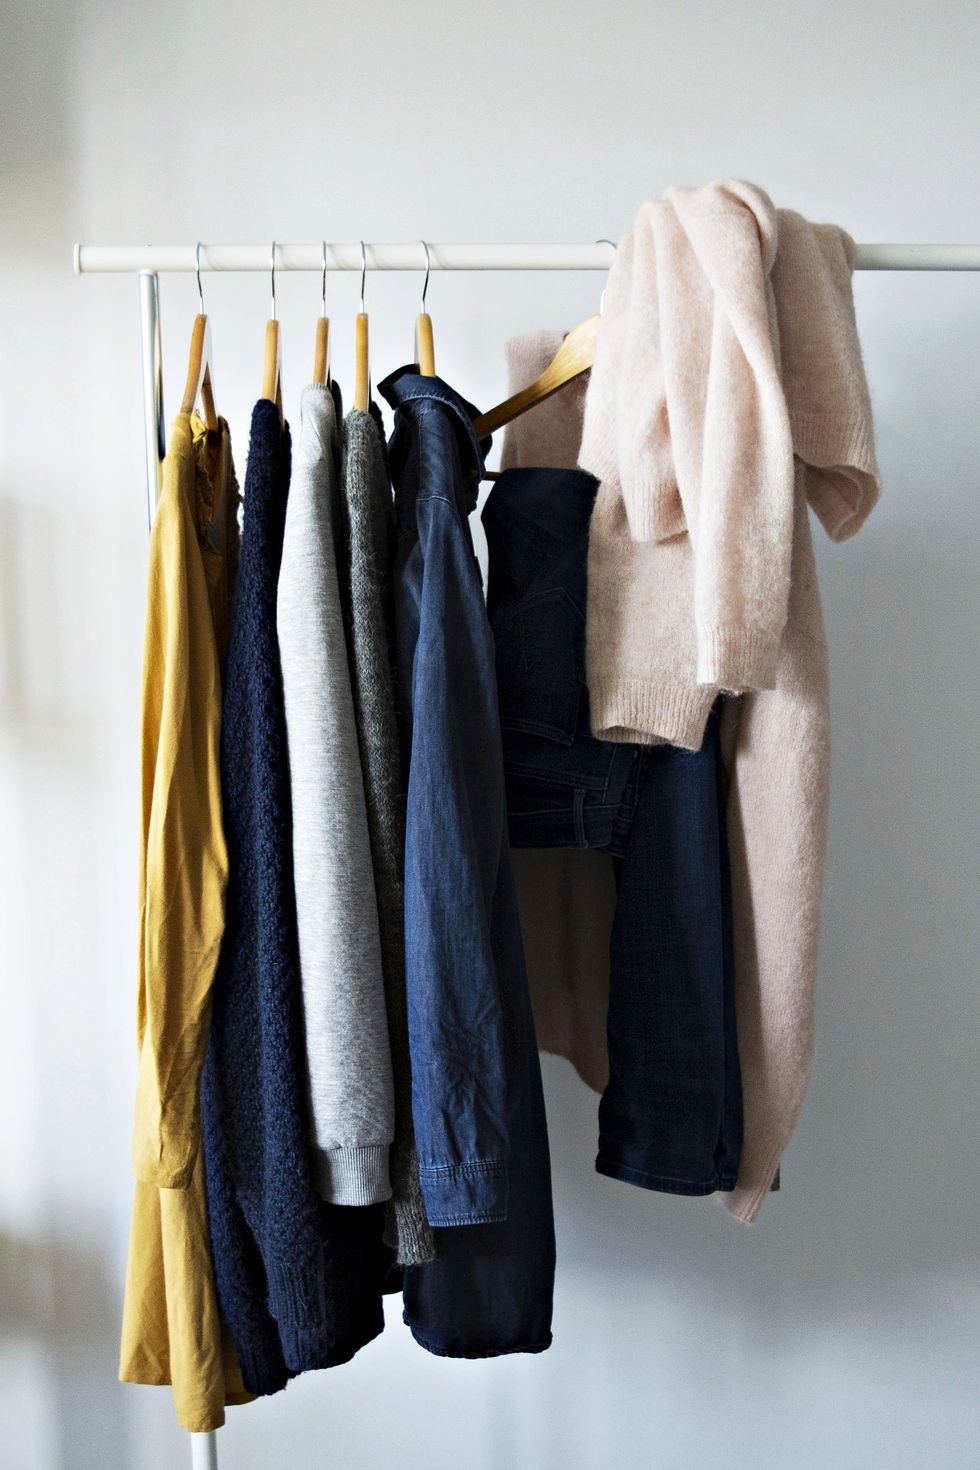 clothes hanging on rack with a pale pink sweater tossed over the rack